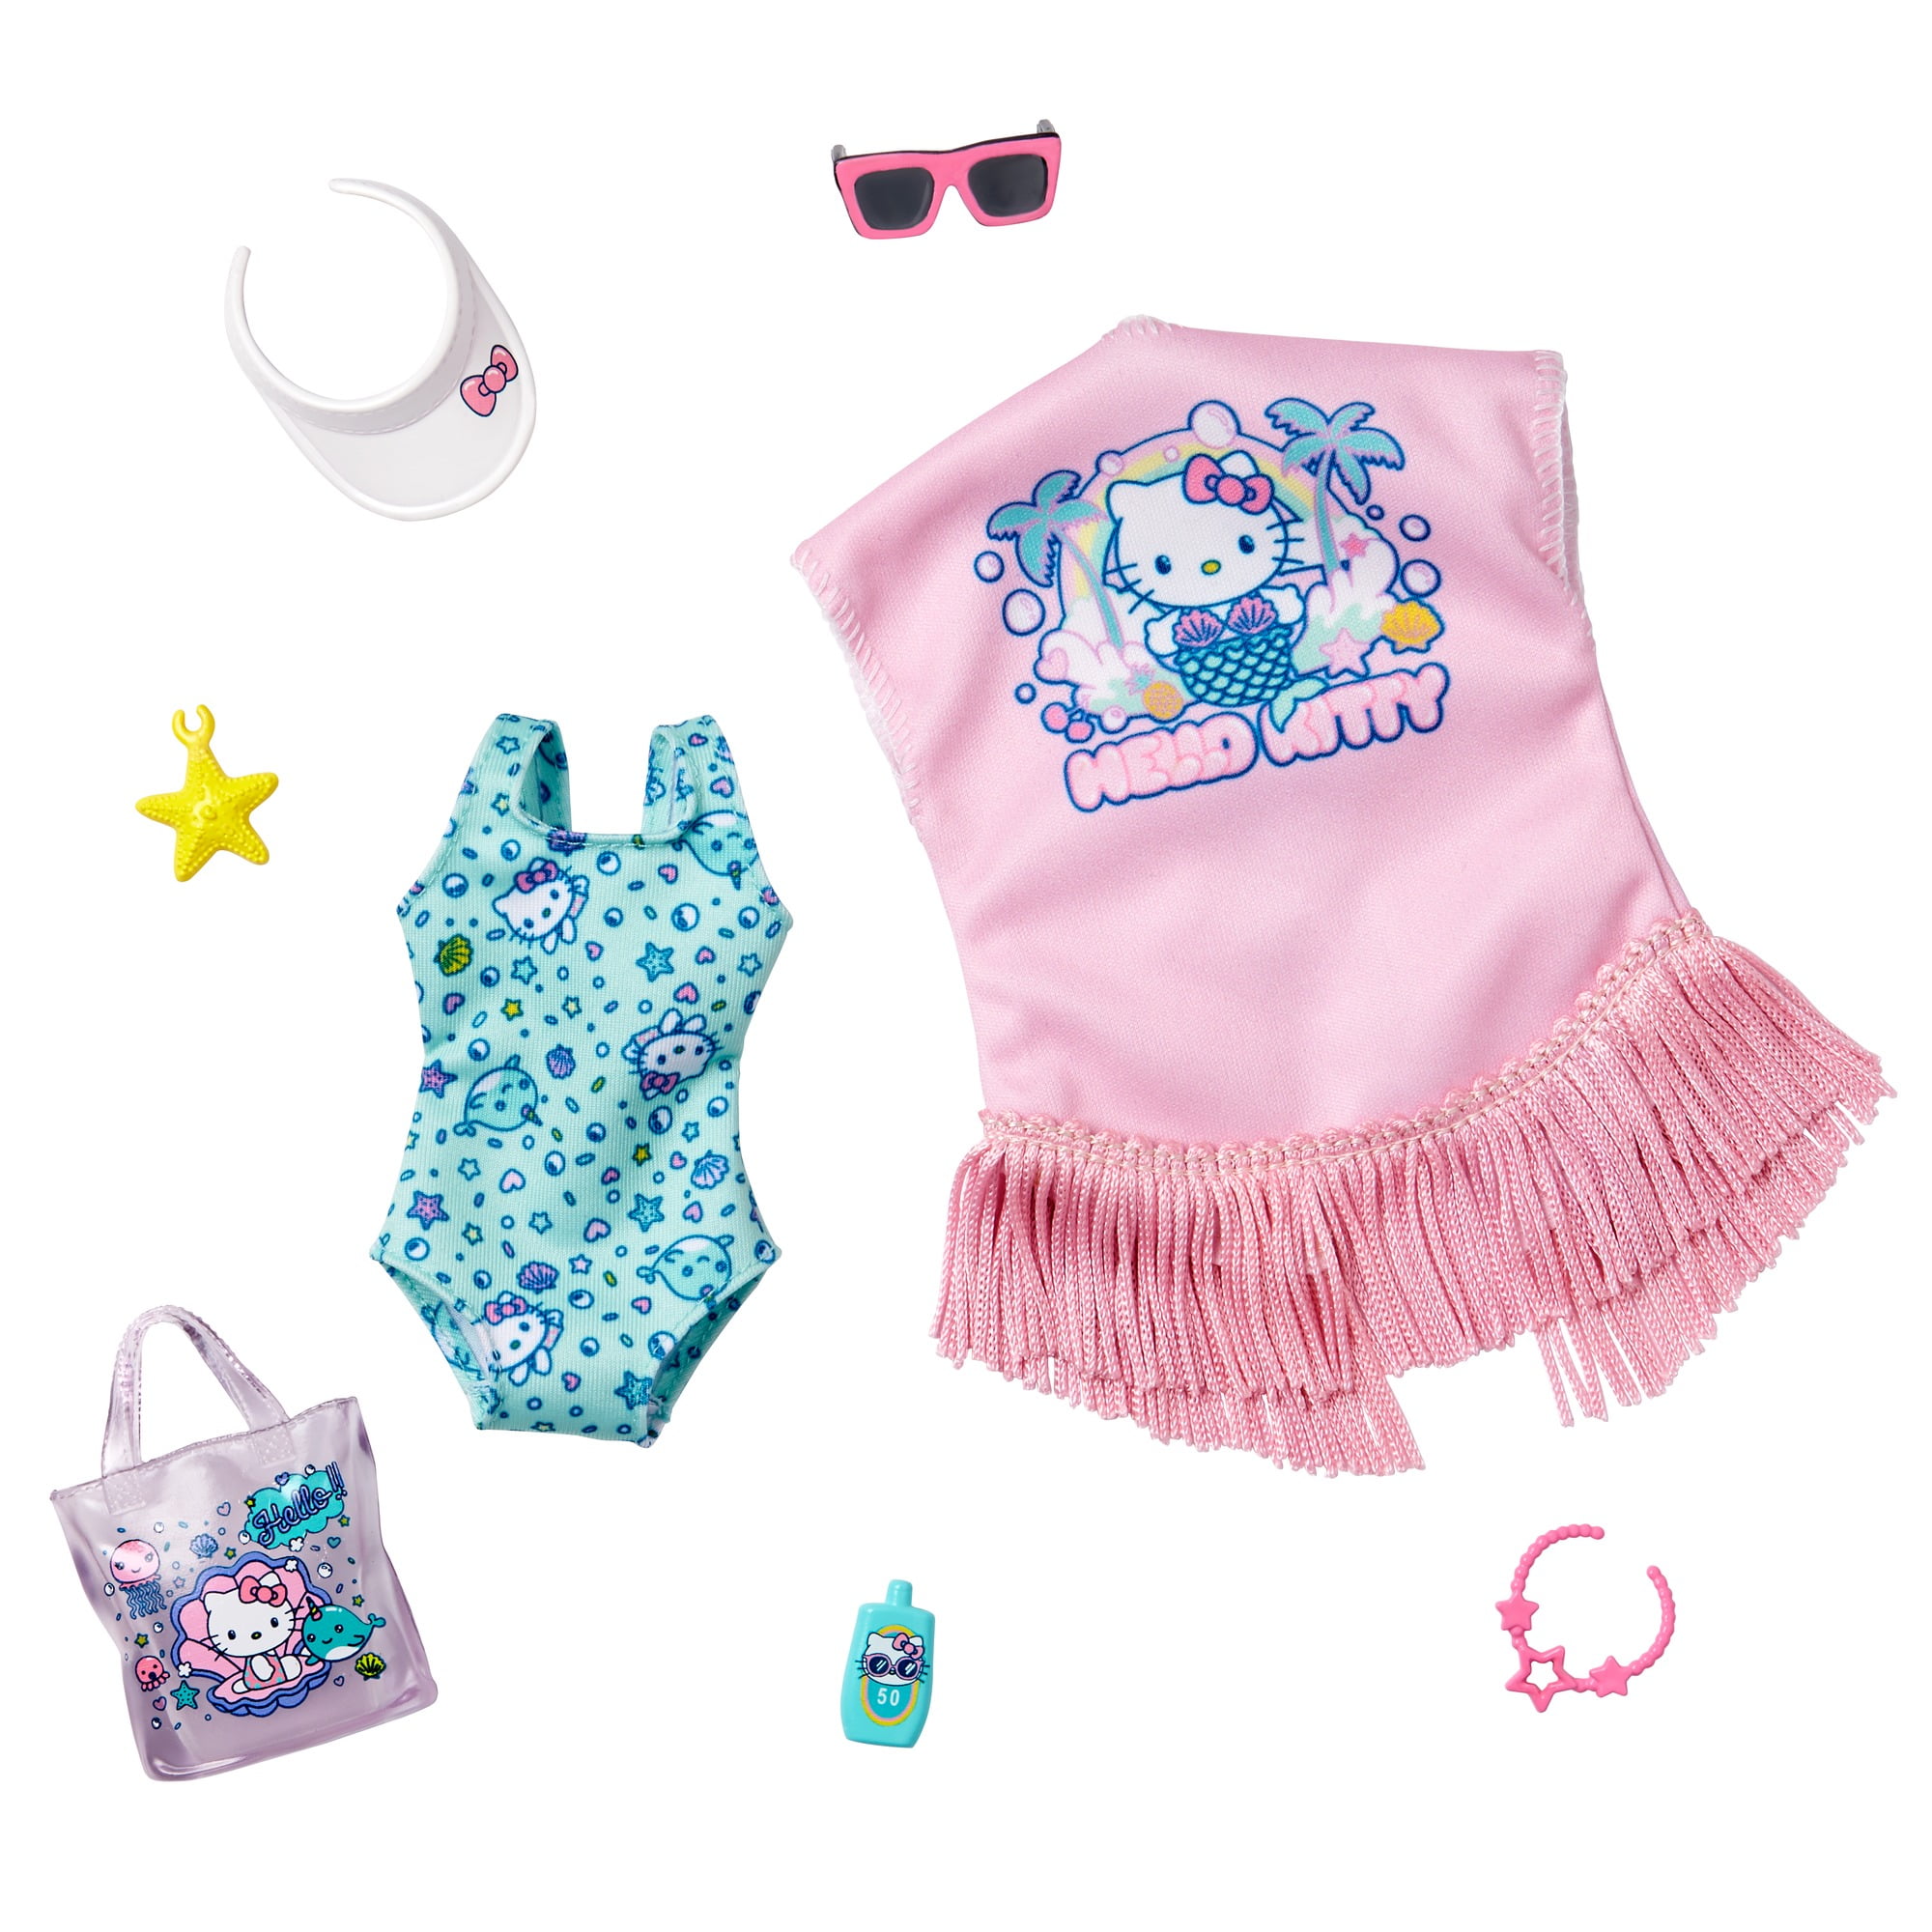 Barbie Doll Clothes: Hello Kitty 